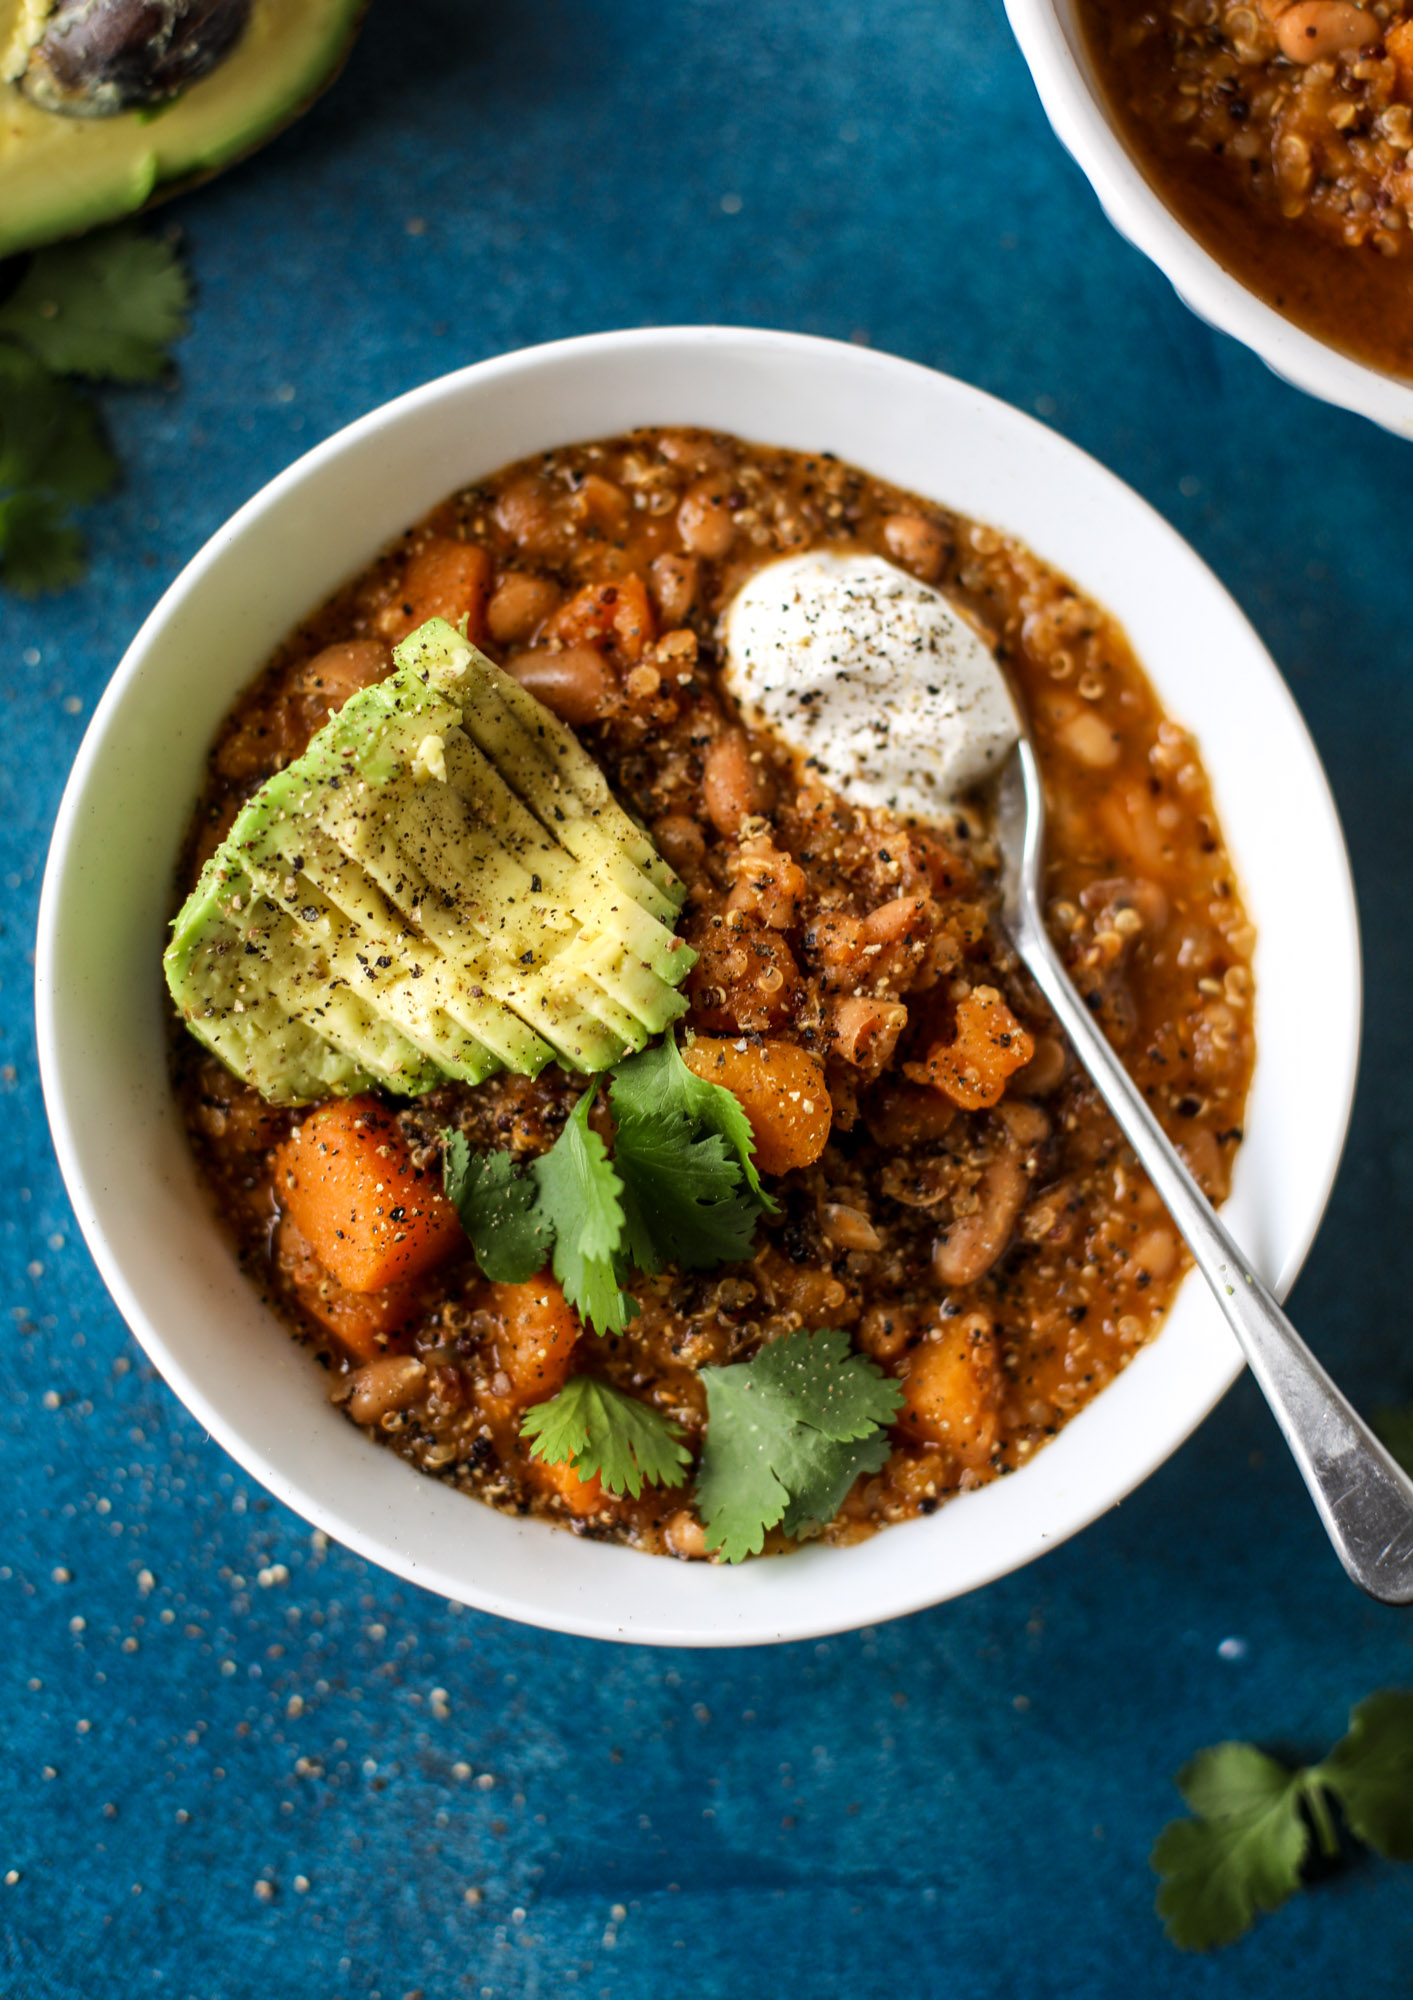 This butternut squash chili is super satisfying and delicious! It's made with pinto beans and quinoa, comes together quickly and is filling and perfect to reheat for lunches. Everything you want in a vegetarian chili! I howsweeteats.com #butternutsquash #chili